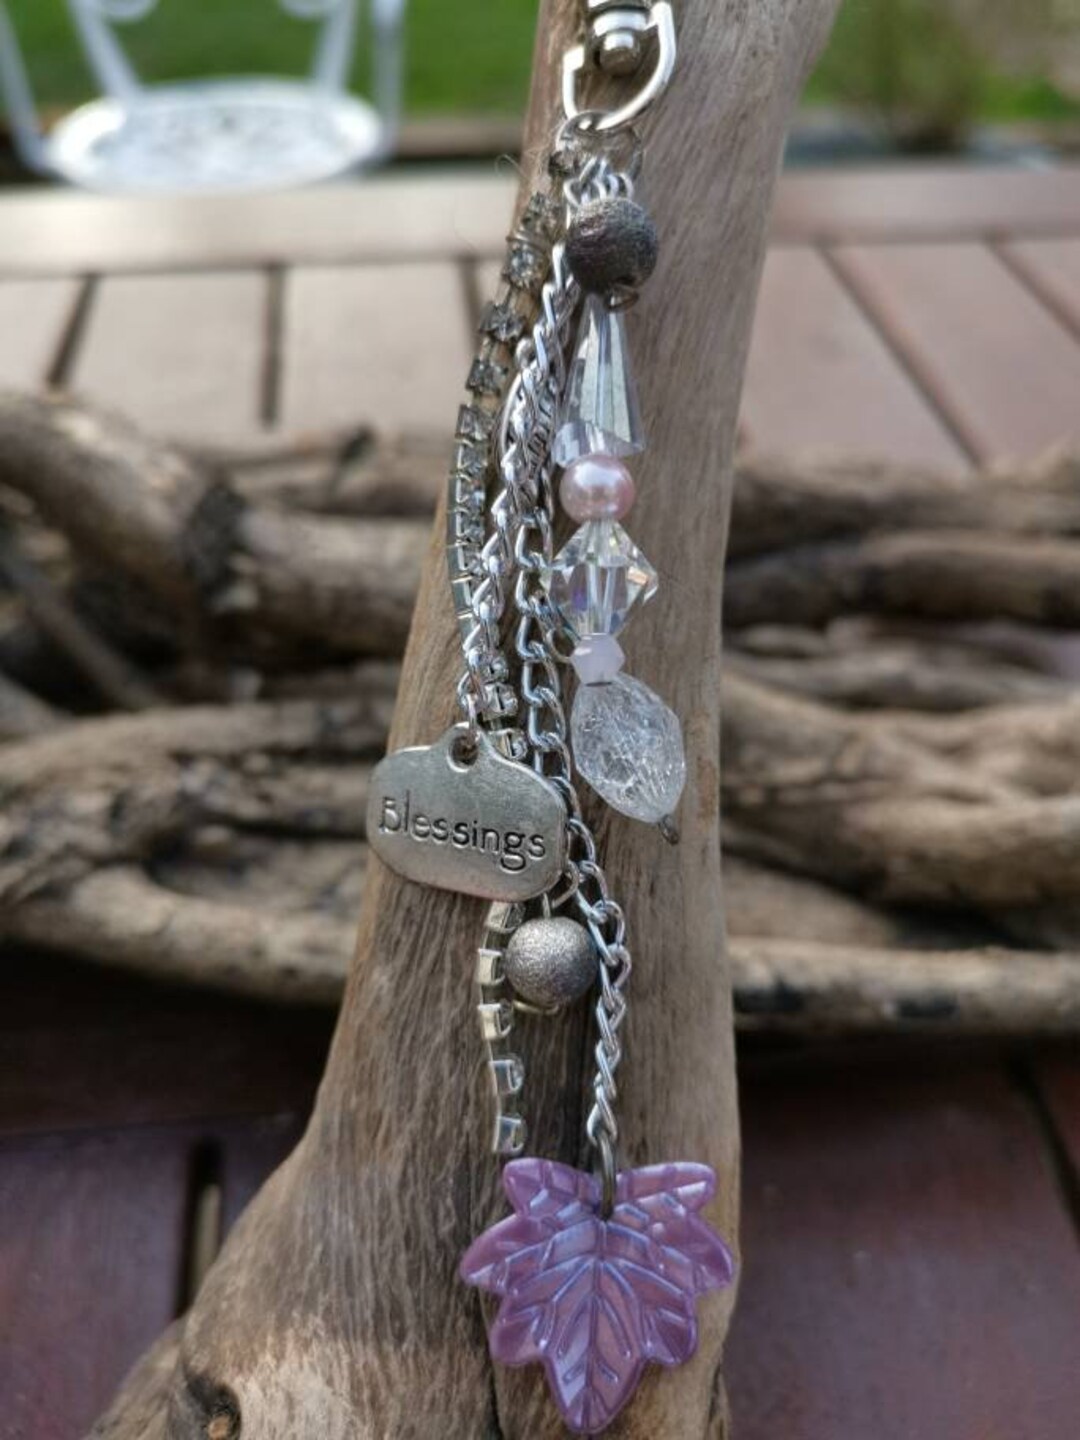 YassyCrafts Beautiful Bag Charm, One of A Kind, Light Pinks, Metal Charms and Beautiful Chain Mix.